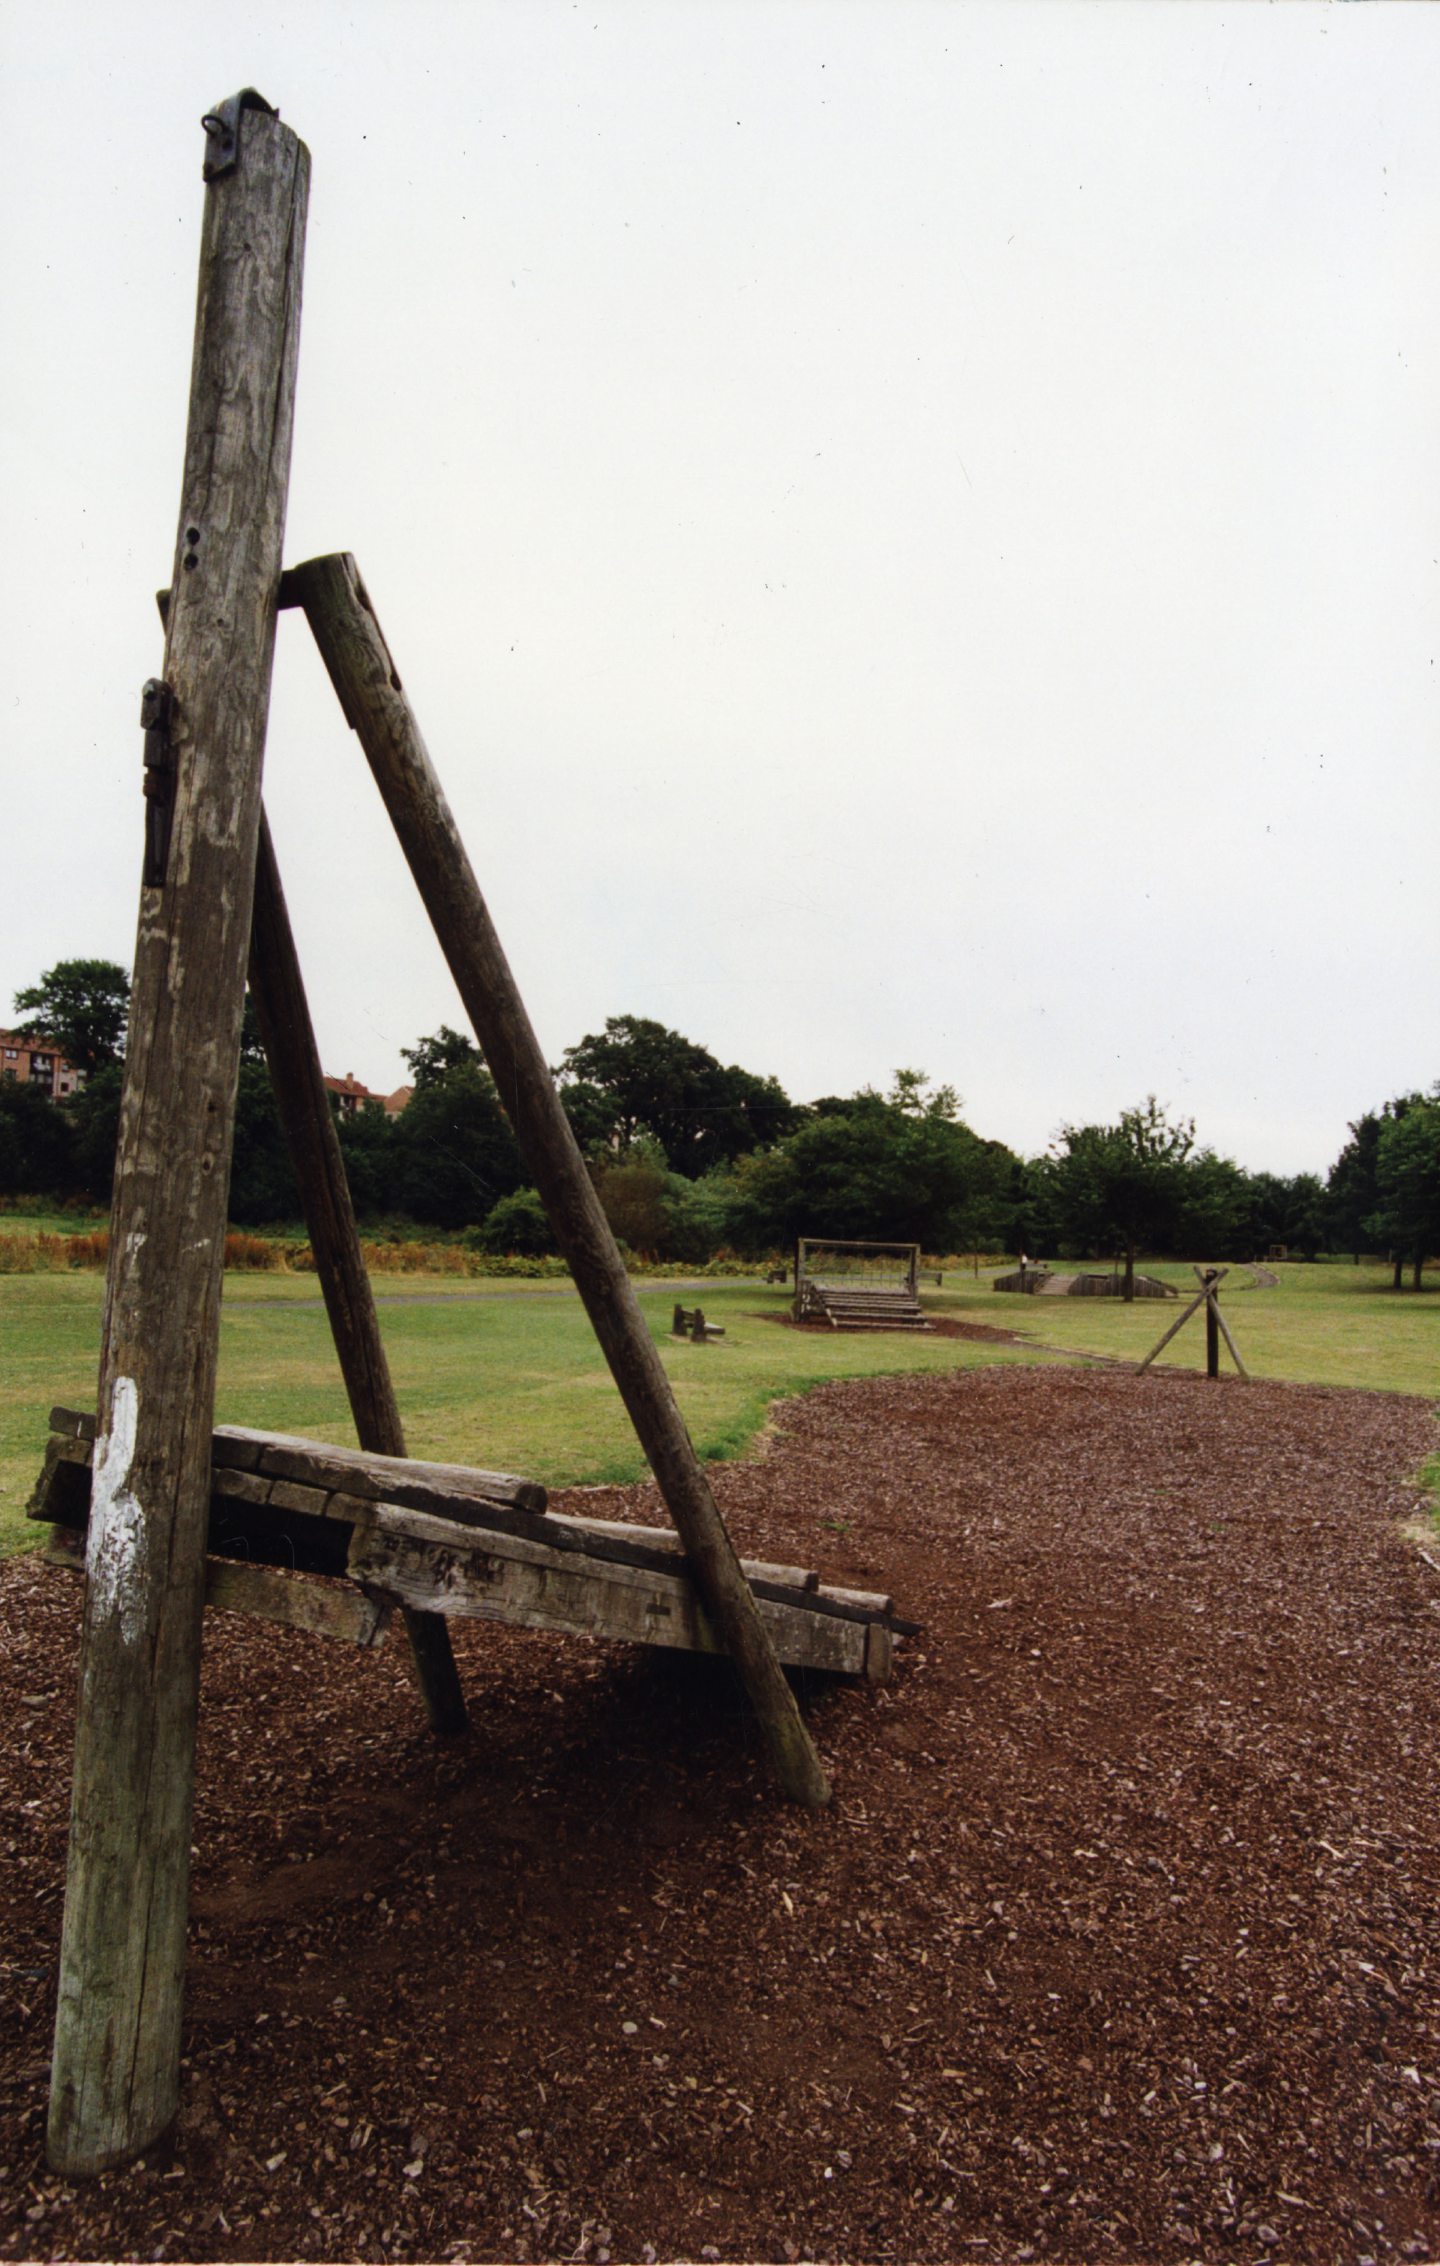 The adventure playground in 1999, before being consigned to the history books. Image: DC Thomson.